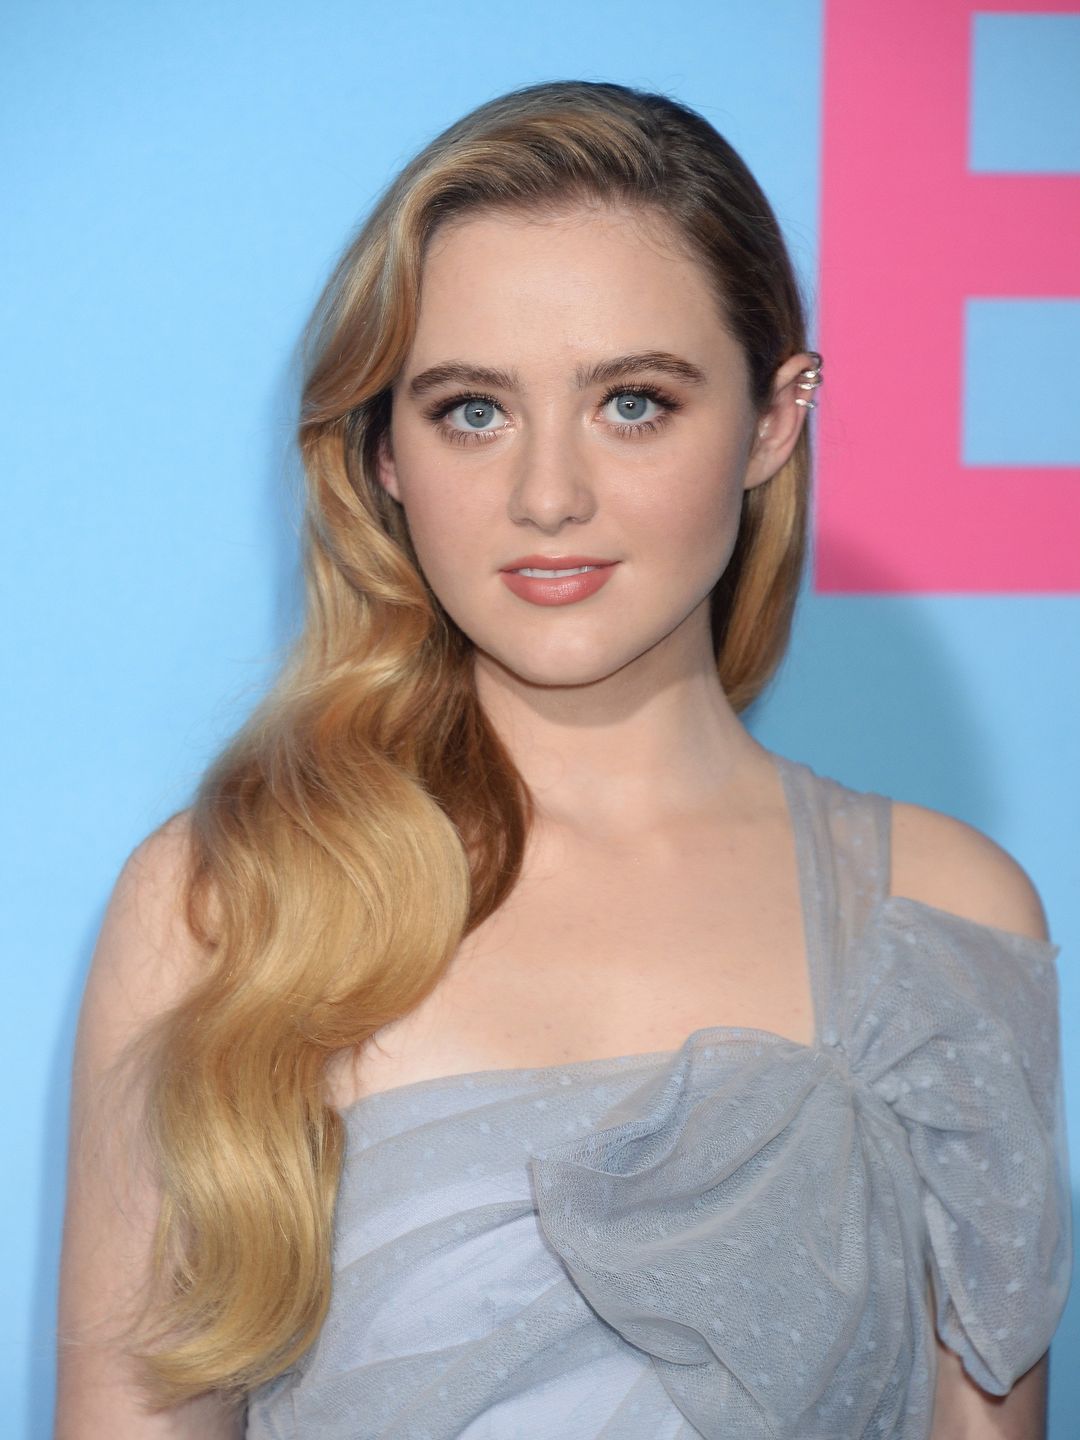 Kathryn Newton young age